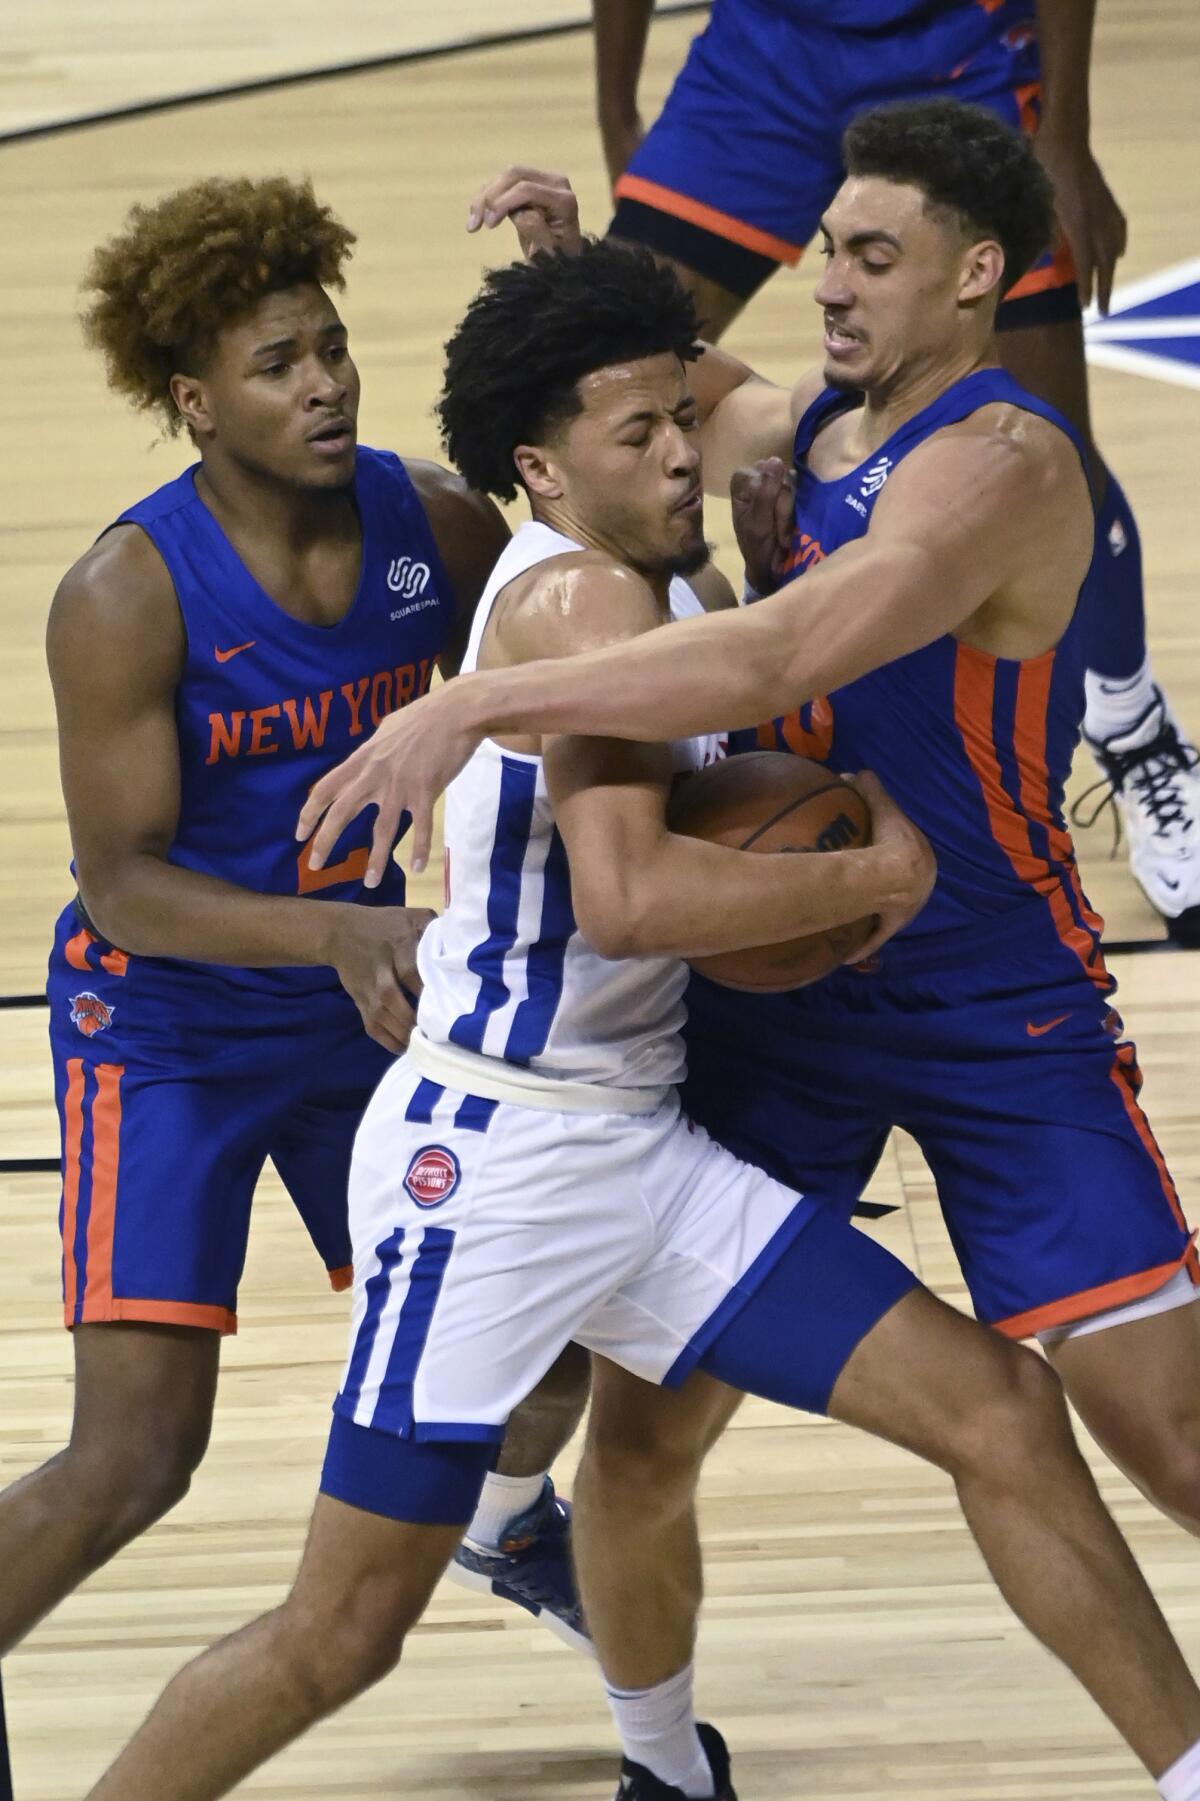 Detroit Pistons guard Cade Cunningham (2) is defended by New York Knicks guard Miles McBride (2) and forward Reid Travis (40) during the first half of an NBA summer league basketball game Friday, Aug. 13, 2021, in Las Vegas. (AP Photo/David Becker)